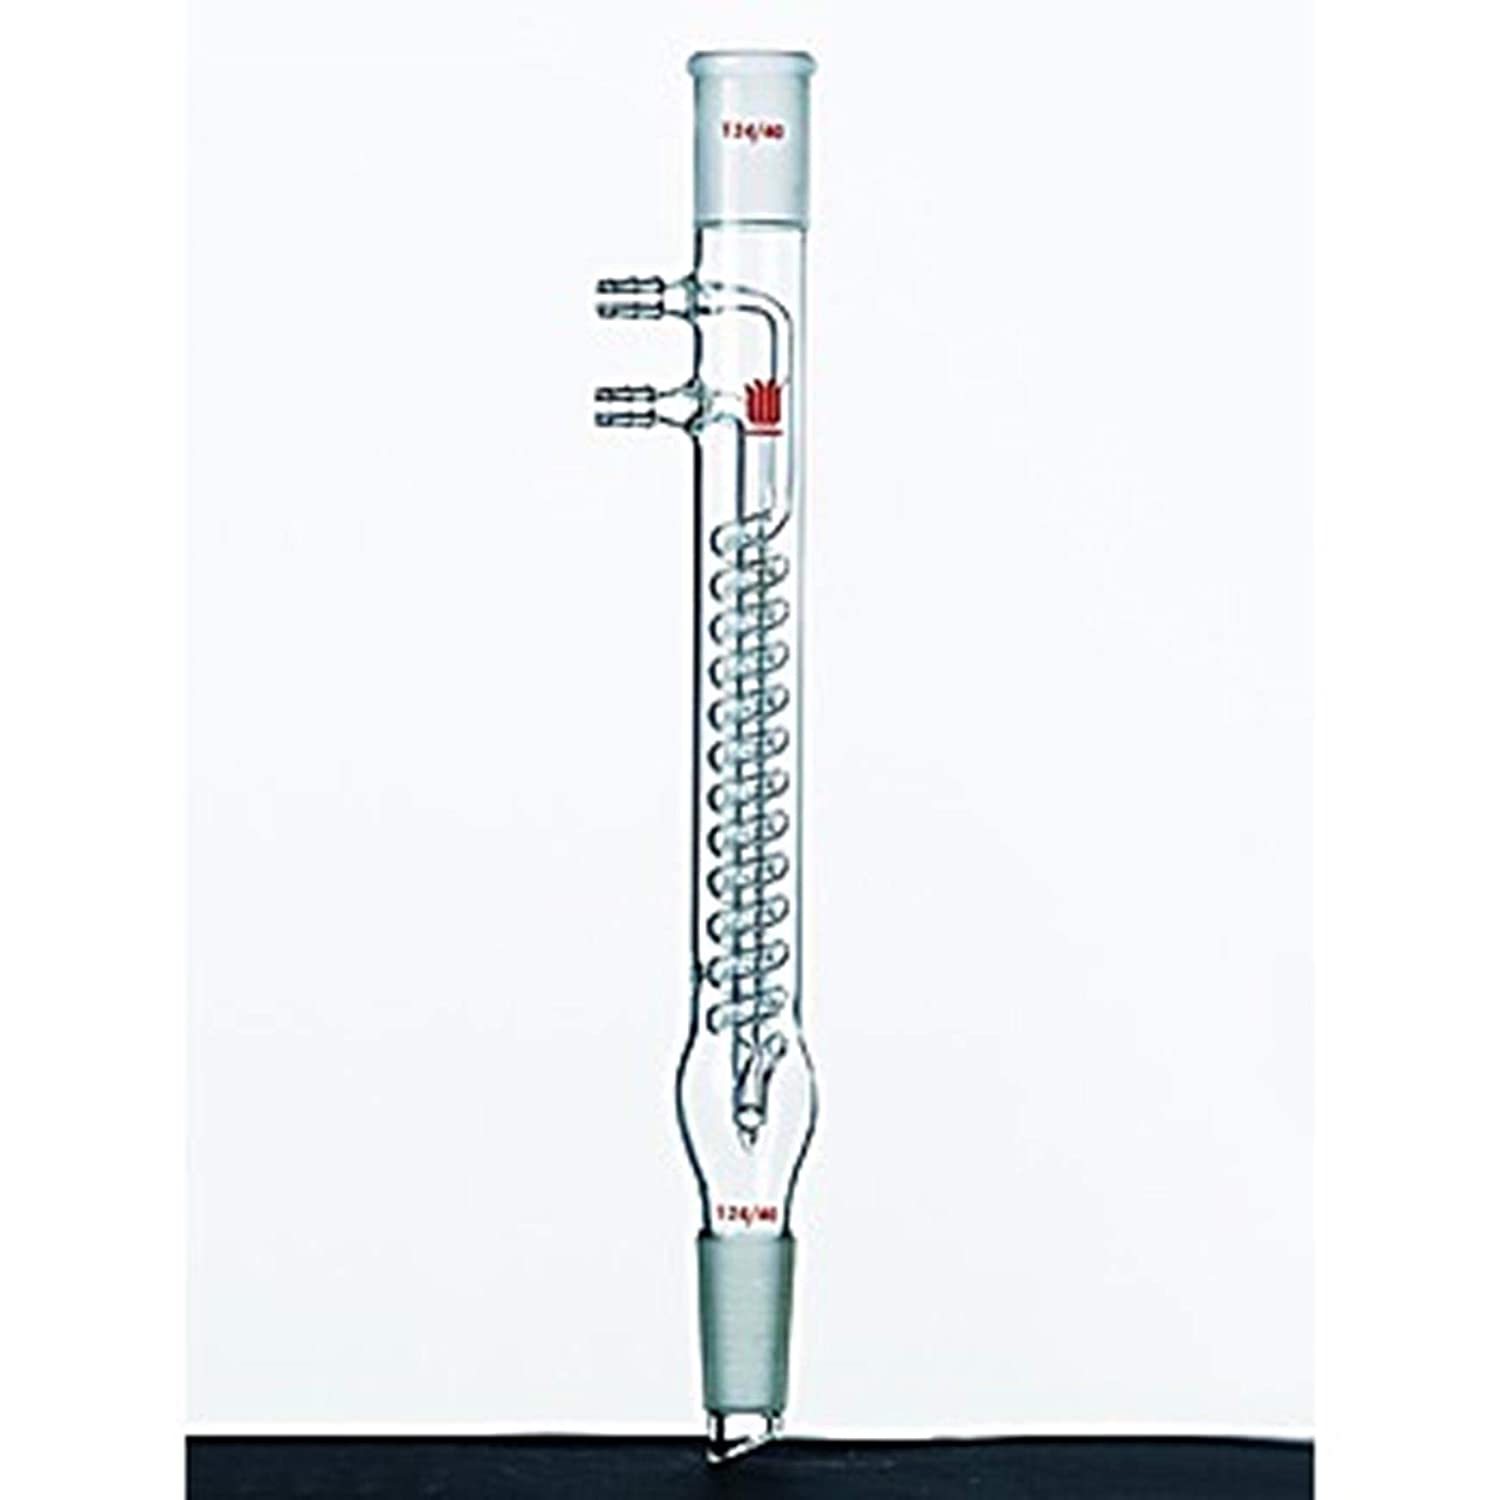 Kemtech America C262280 Synthware Reflux Condenser, 14/20 Joint, 180 mm Jacket Length, 8 mm Hose Connection, 305 mm Height